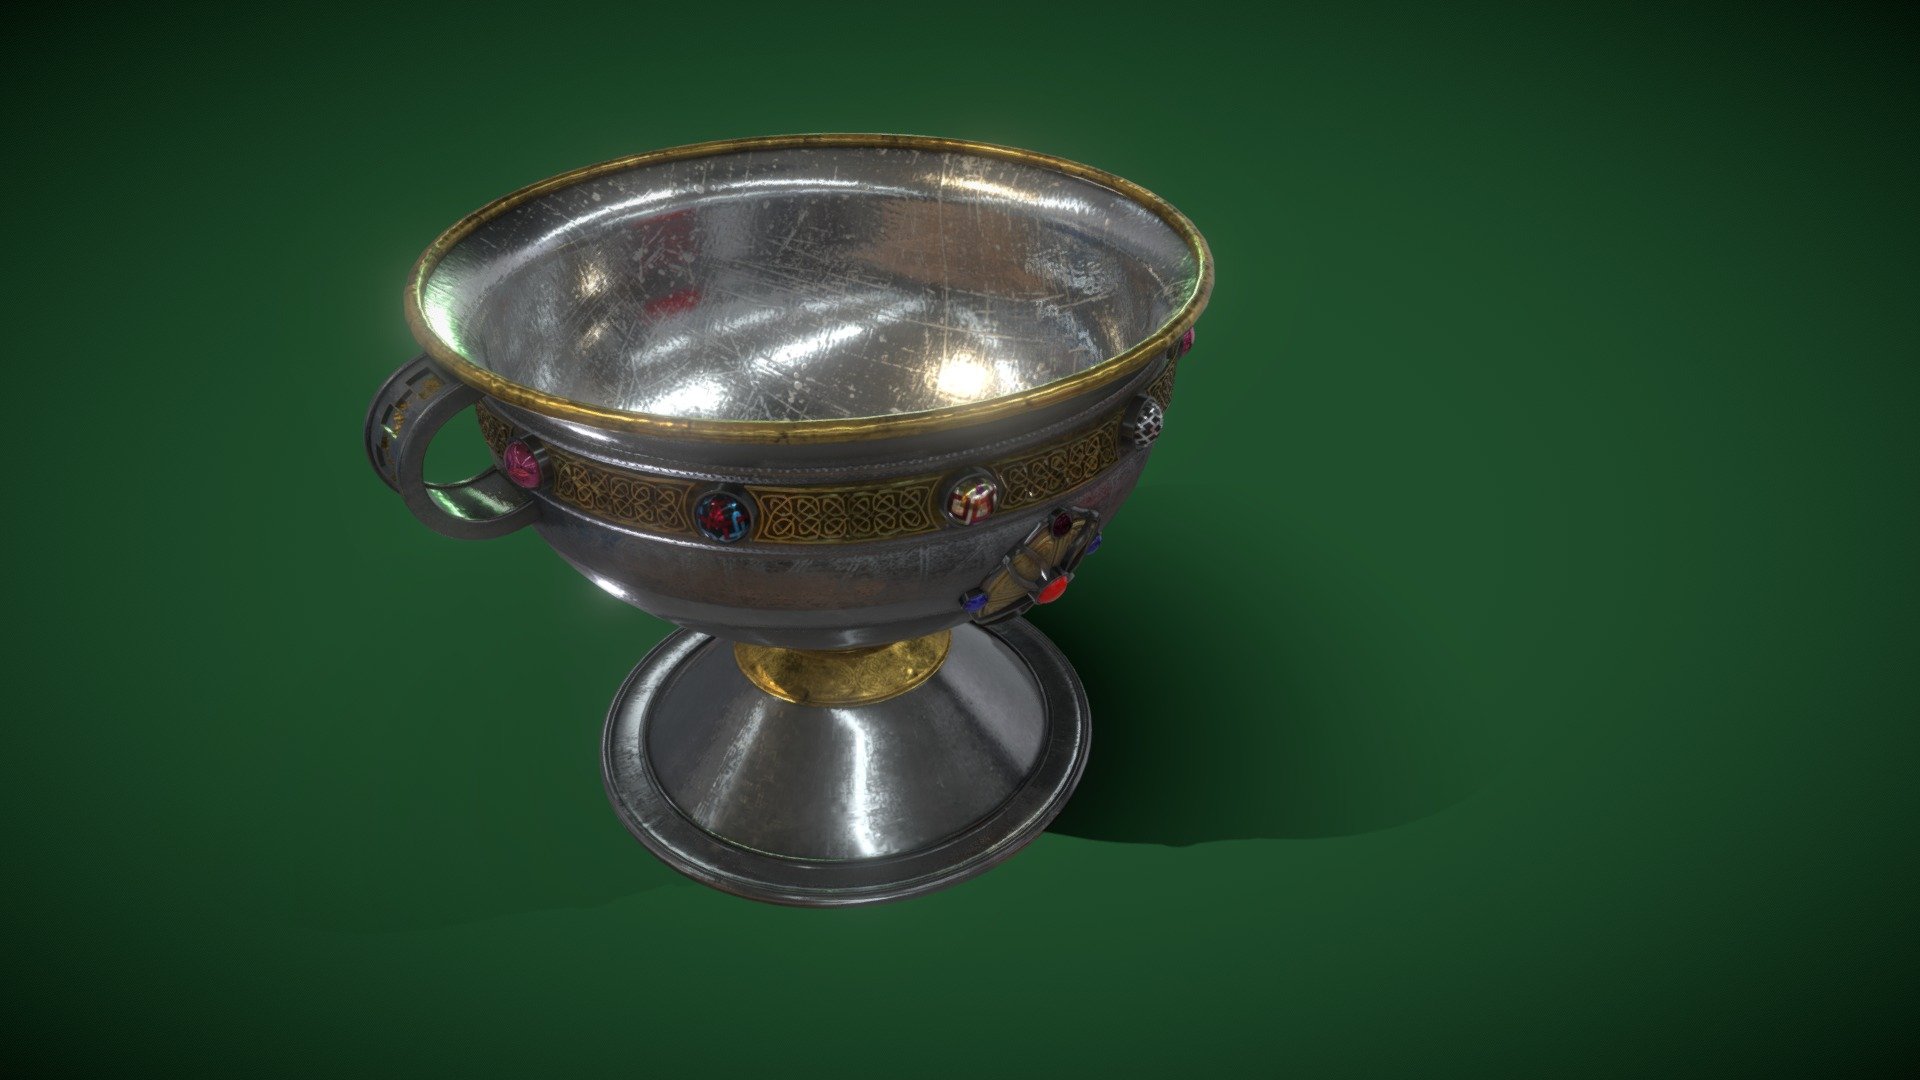 The 8th century Ardagh Chalice is one of the greatest treasures of the early Irish Church. It is part of a hoard of objects found in the 19th century by a young man digging for potatoes near Ardagh, Co. Limerick. It was used for dispensing Eucharistic wine during the celebration of Mass. The form of the chalice recalls late Roman tableware, but the method of construction is Irish and it is regarded as one of the world finest example sof fine metal work for its period 3d model